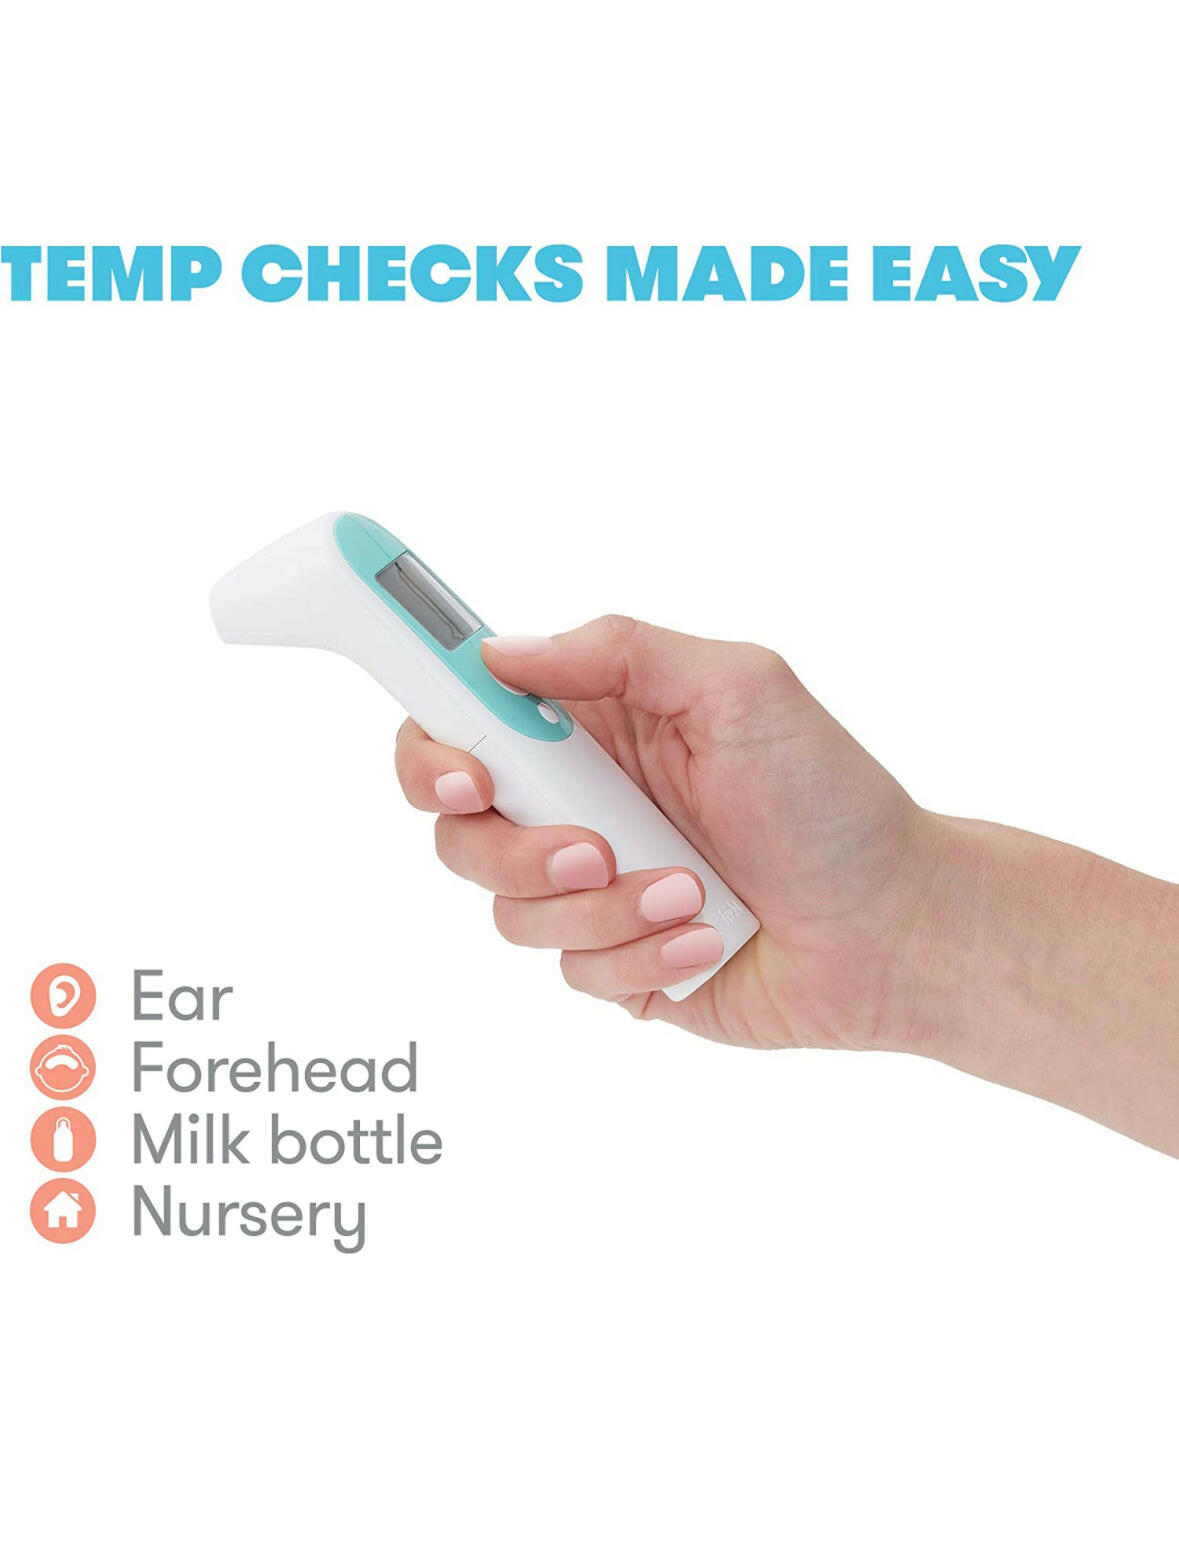 Frida Baby Infrared Thermometer 3-in-1 Ear, Forehead + Touchless for Babies, Toddlers, Adults, and Bottle Temperatures,Digital.